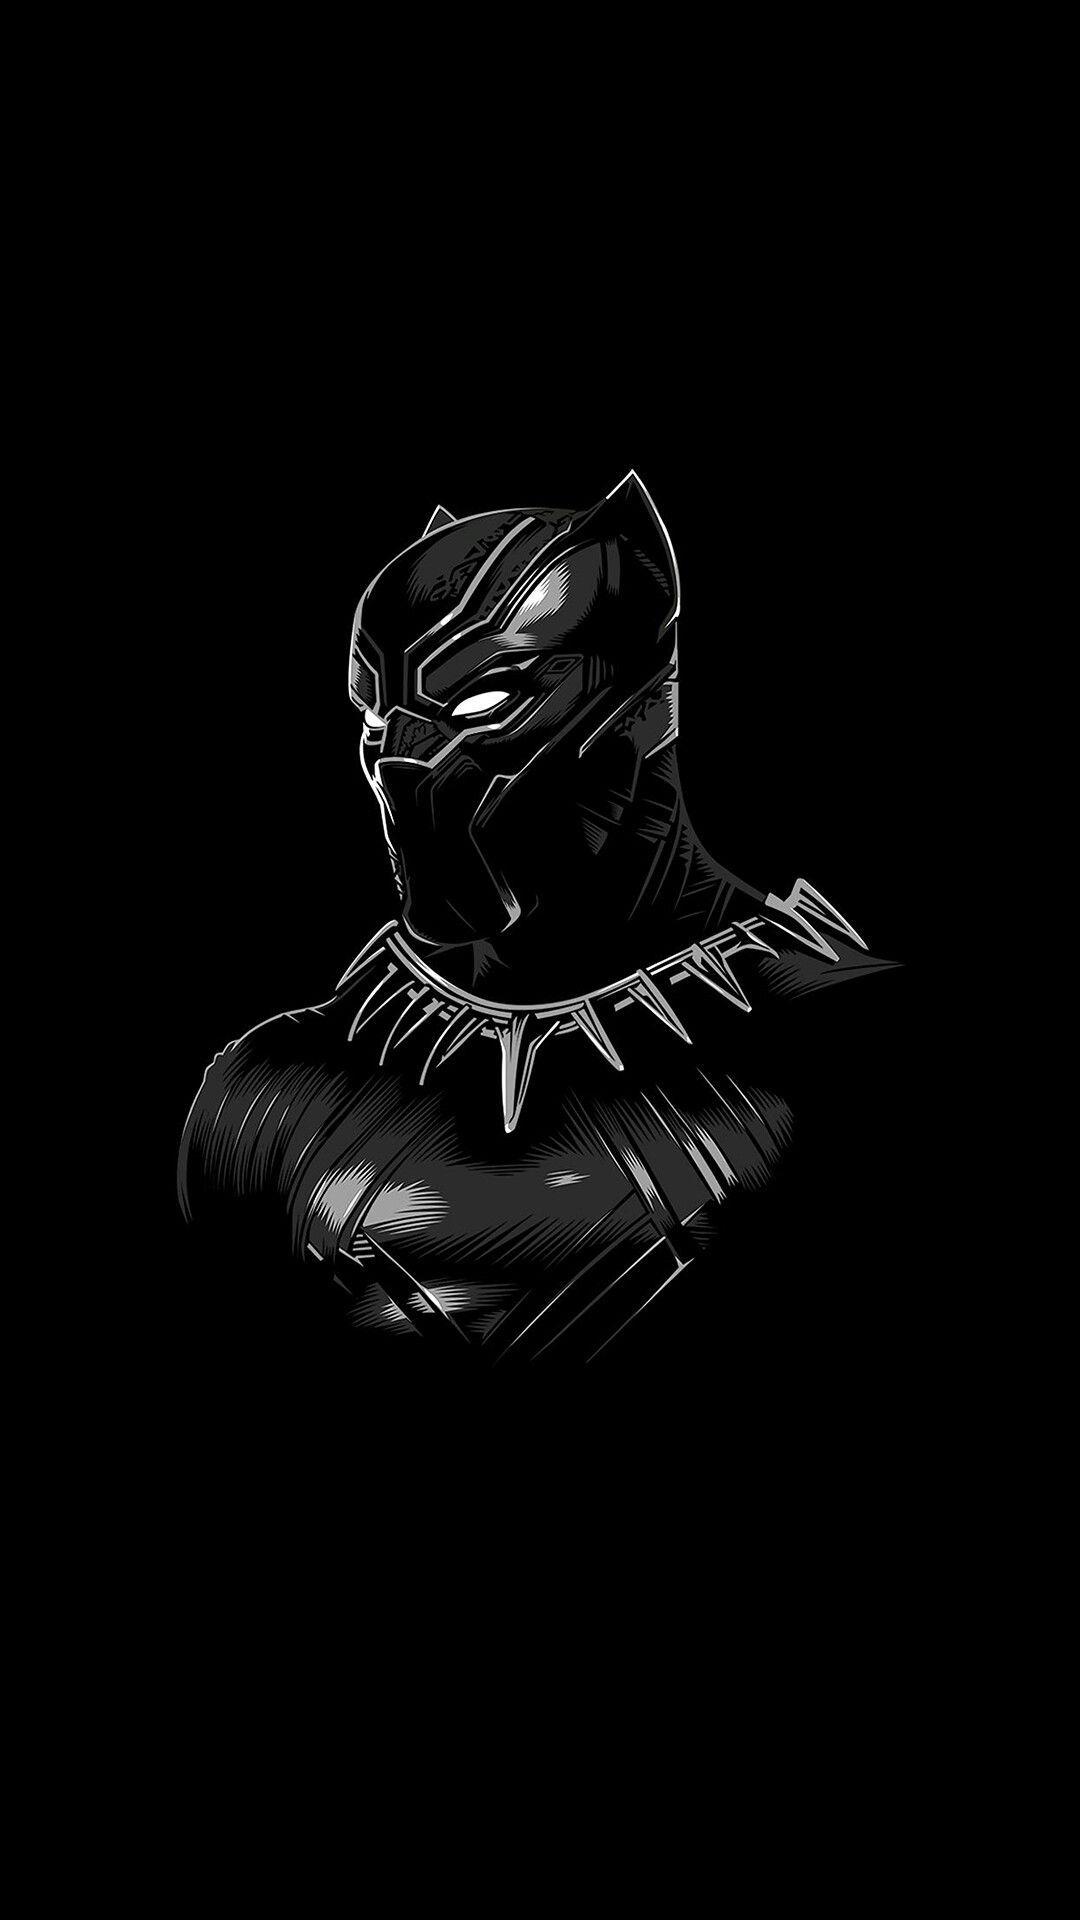 Marvel Wallpaper for iPhone from Uploaded by user. Black panther marvel, Marvel wallpaper hd, Black panther